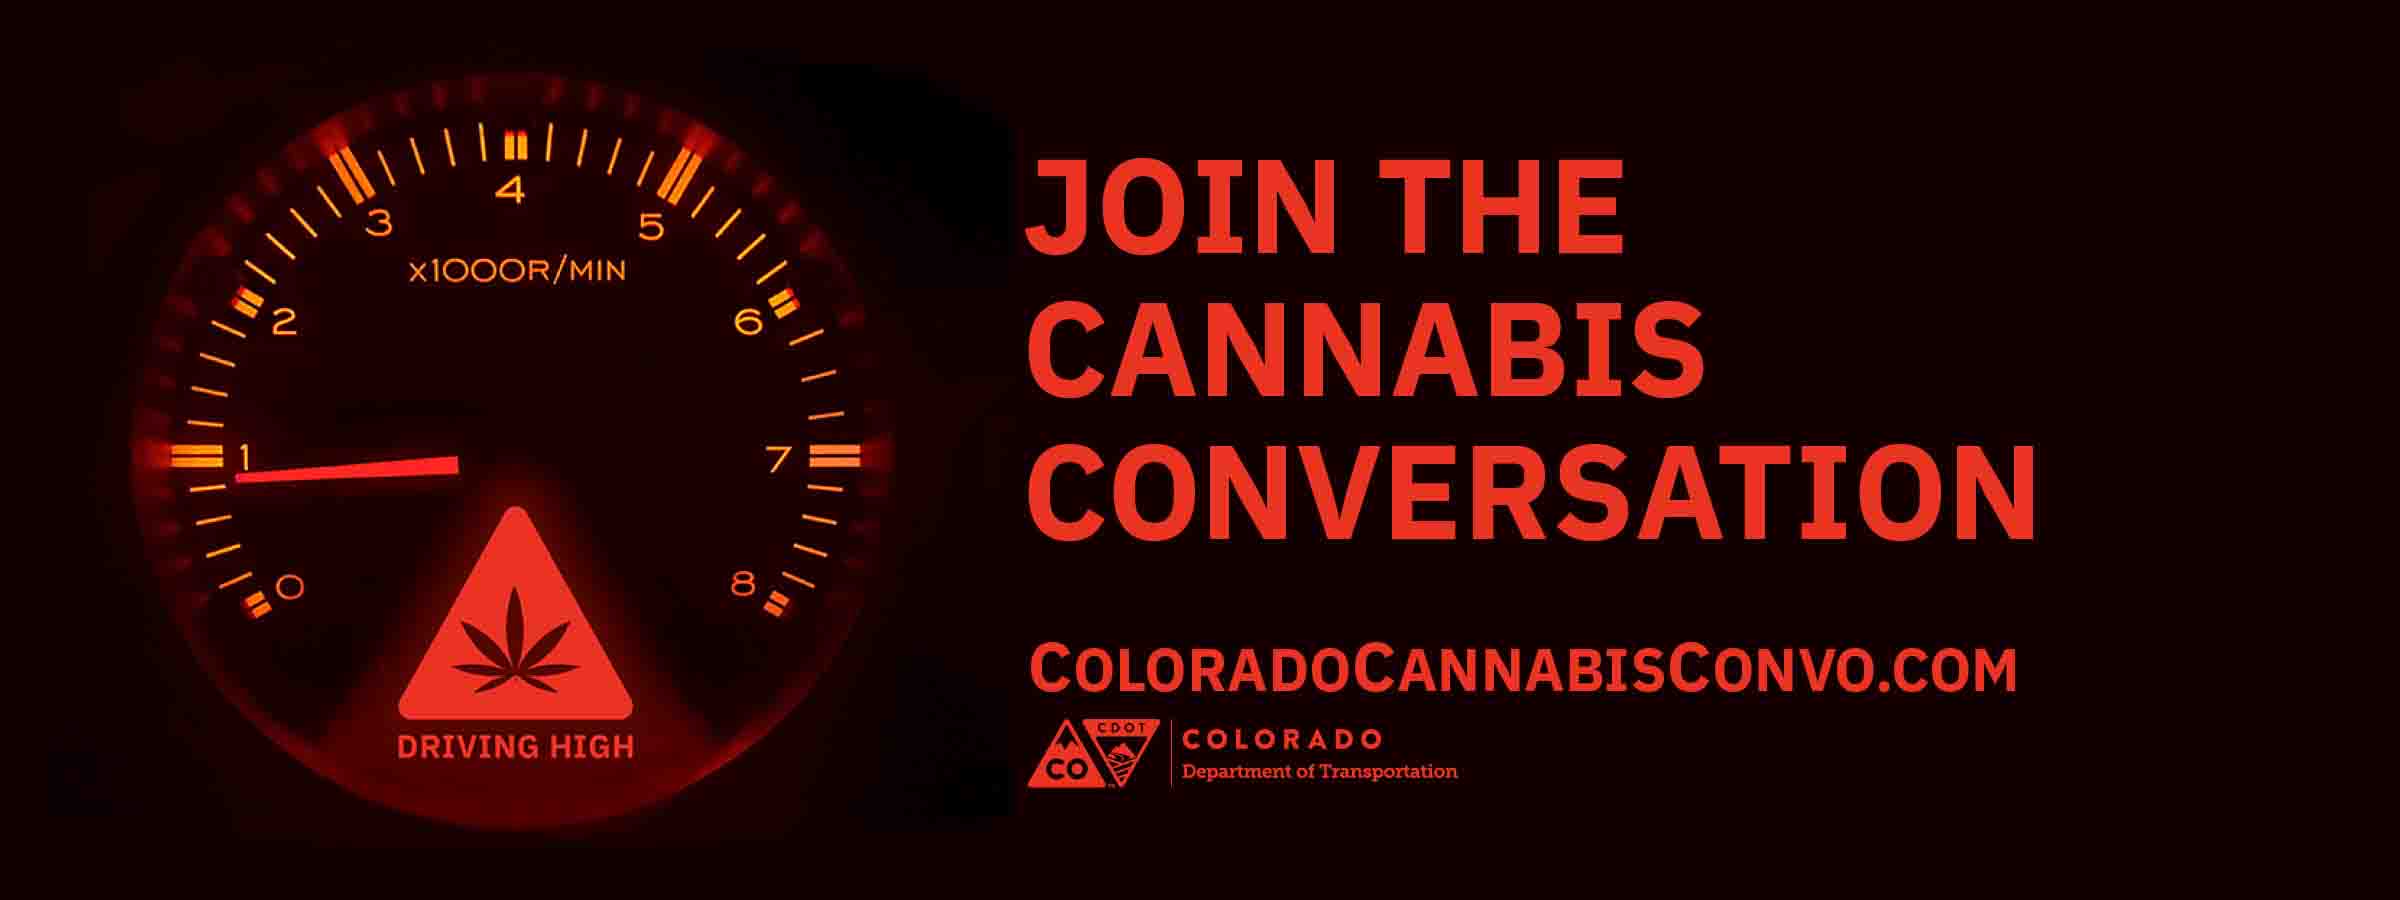 Join the Cannabis Conversation.jpg detail image